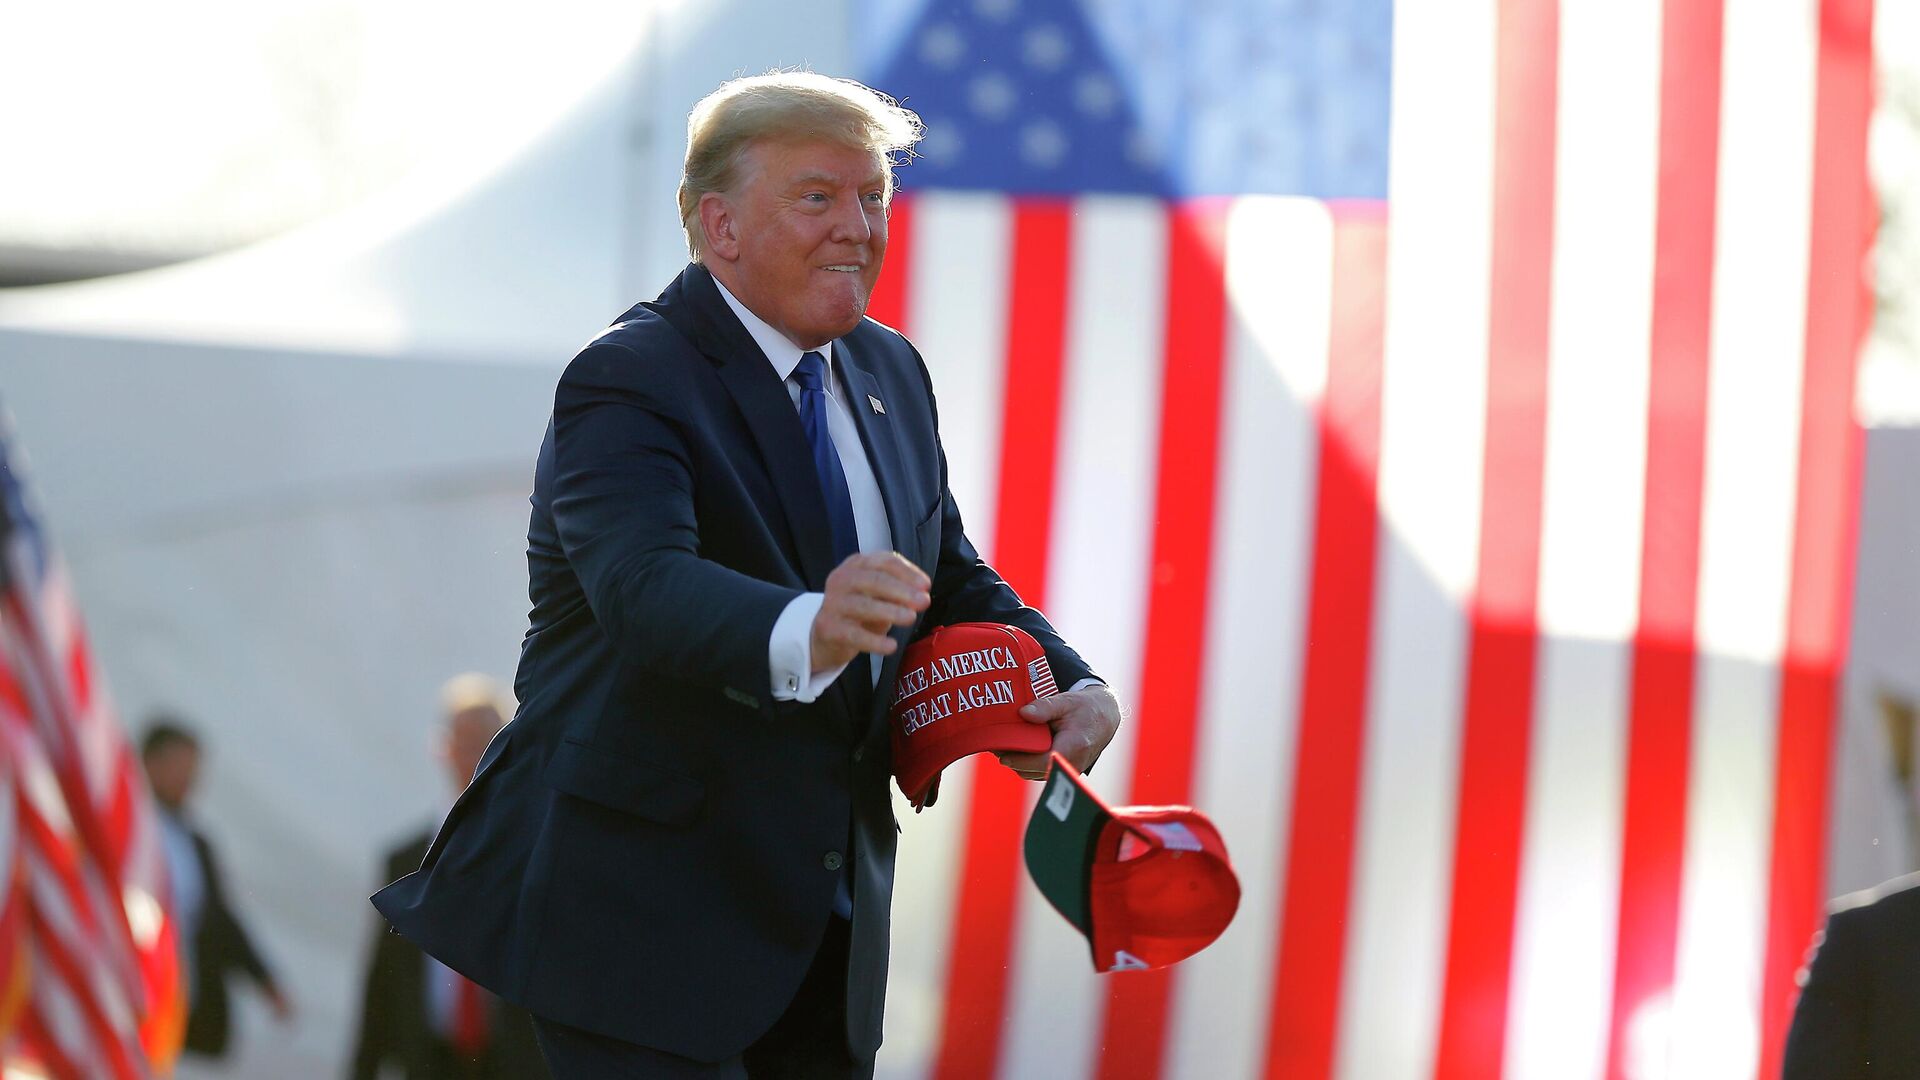 Former President Donald Trump is introduced at a rally at the Delaware County Fairgrounds, Saturday, April 23, 2022, in Delaware, Ohio, to endorse Republican candidates ahead of the Ohio primary on May 3.  - Sputnik International, 1920, 14.07.2022